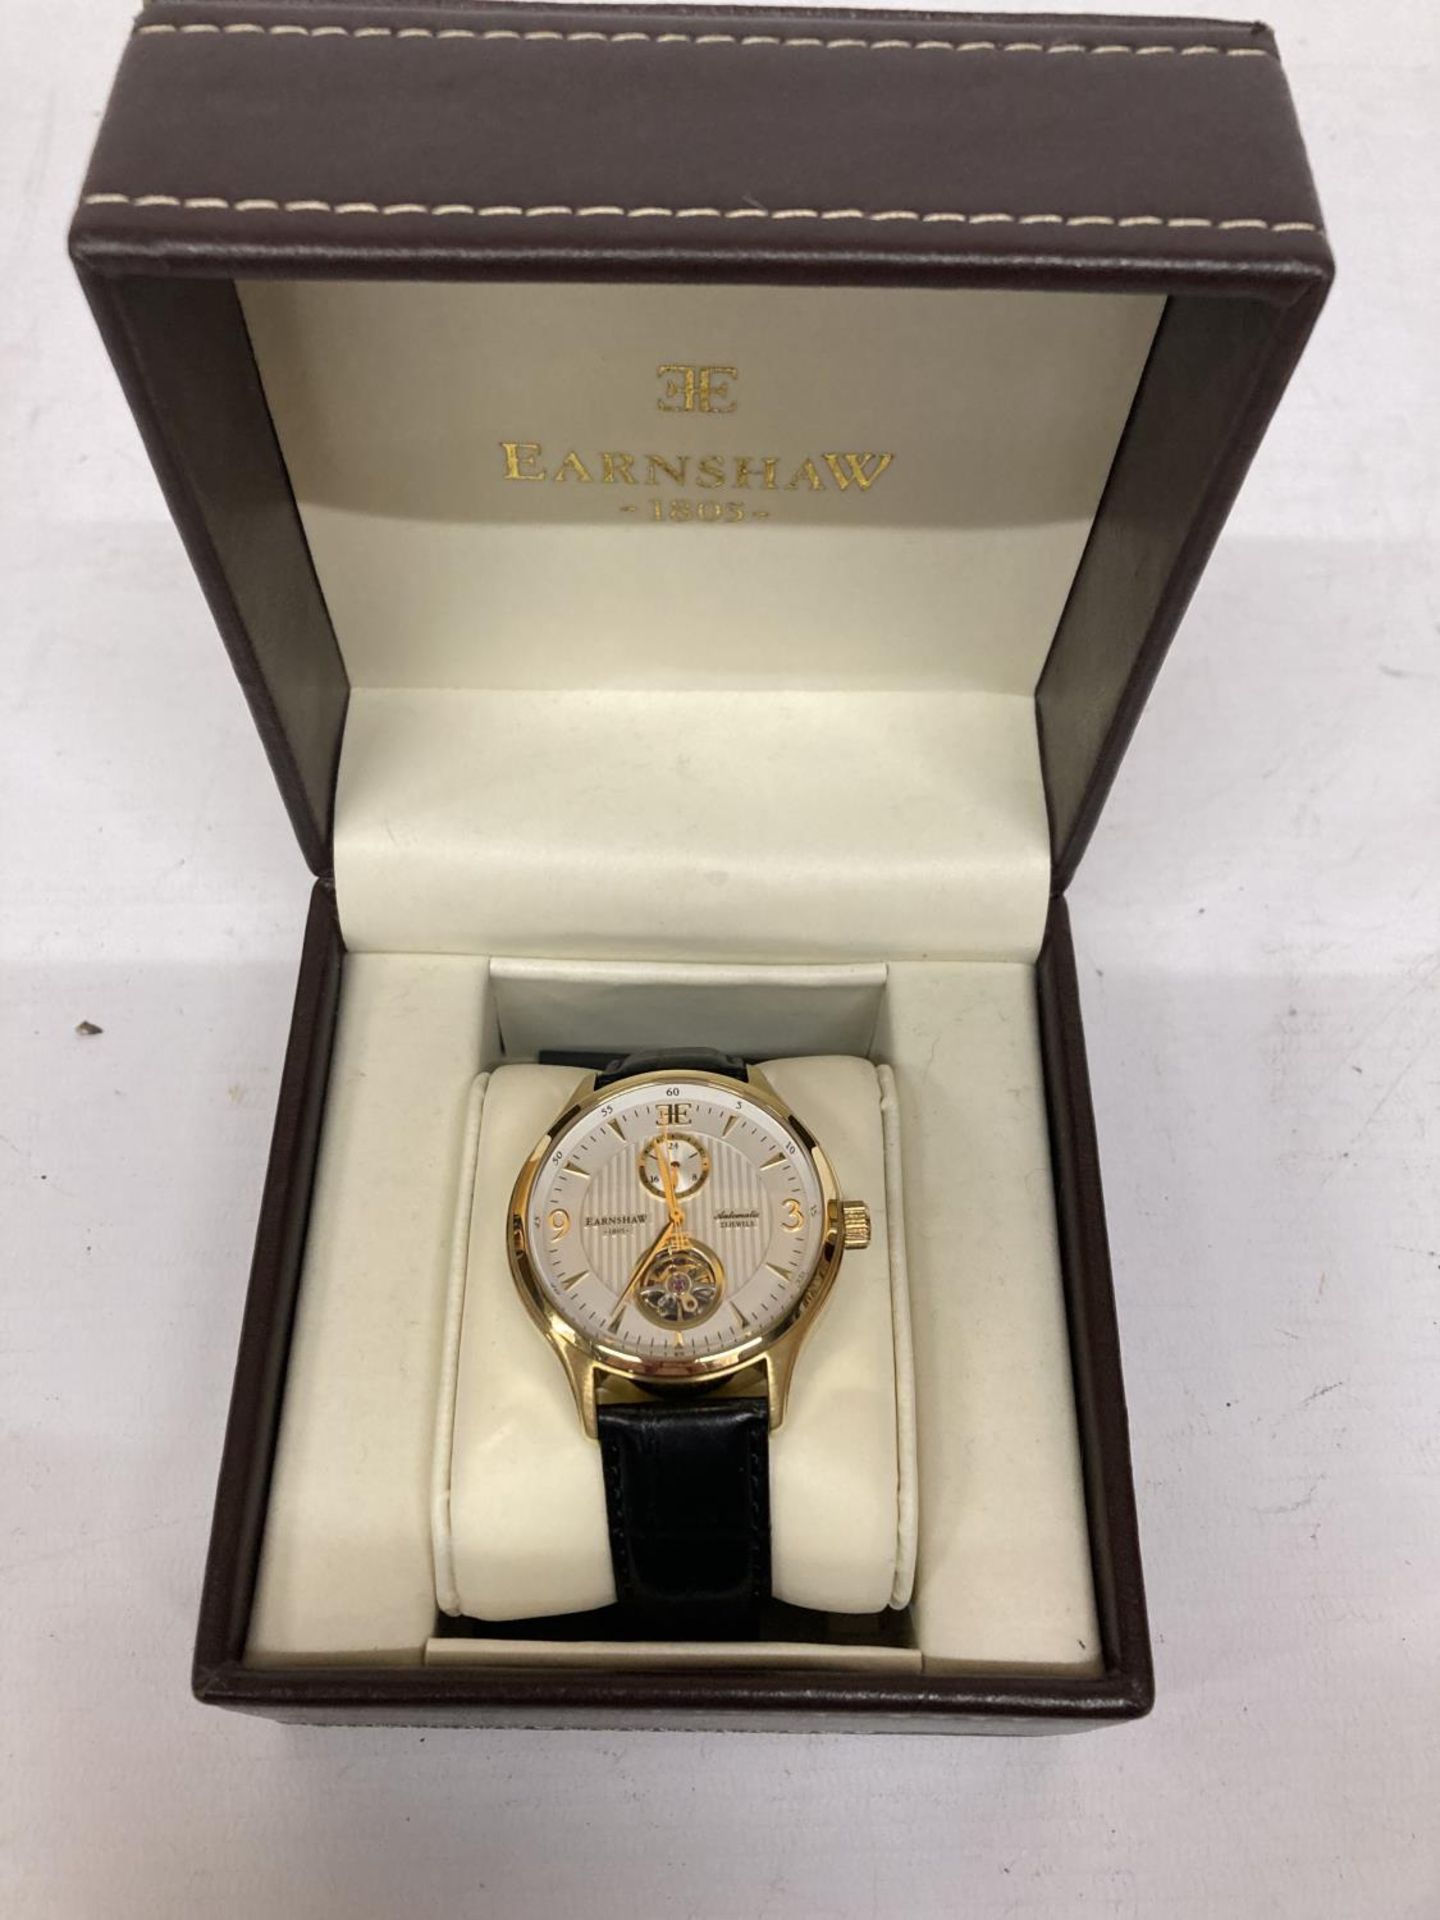 A GENTS EARNSHAW AUTOMATIC WATCH, NEW OLD STOCK - Image 3 of 4